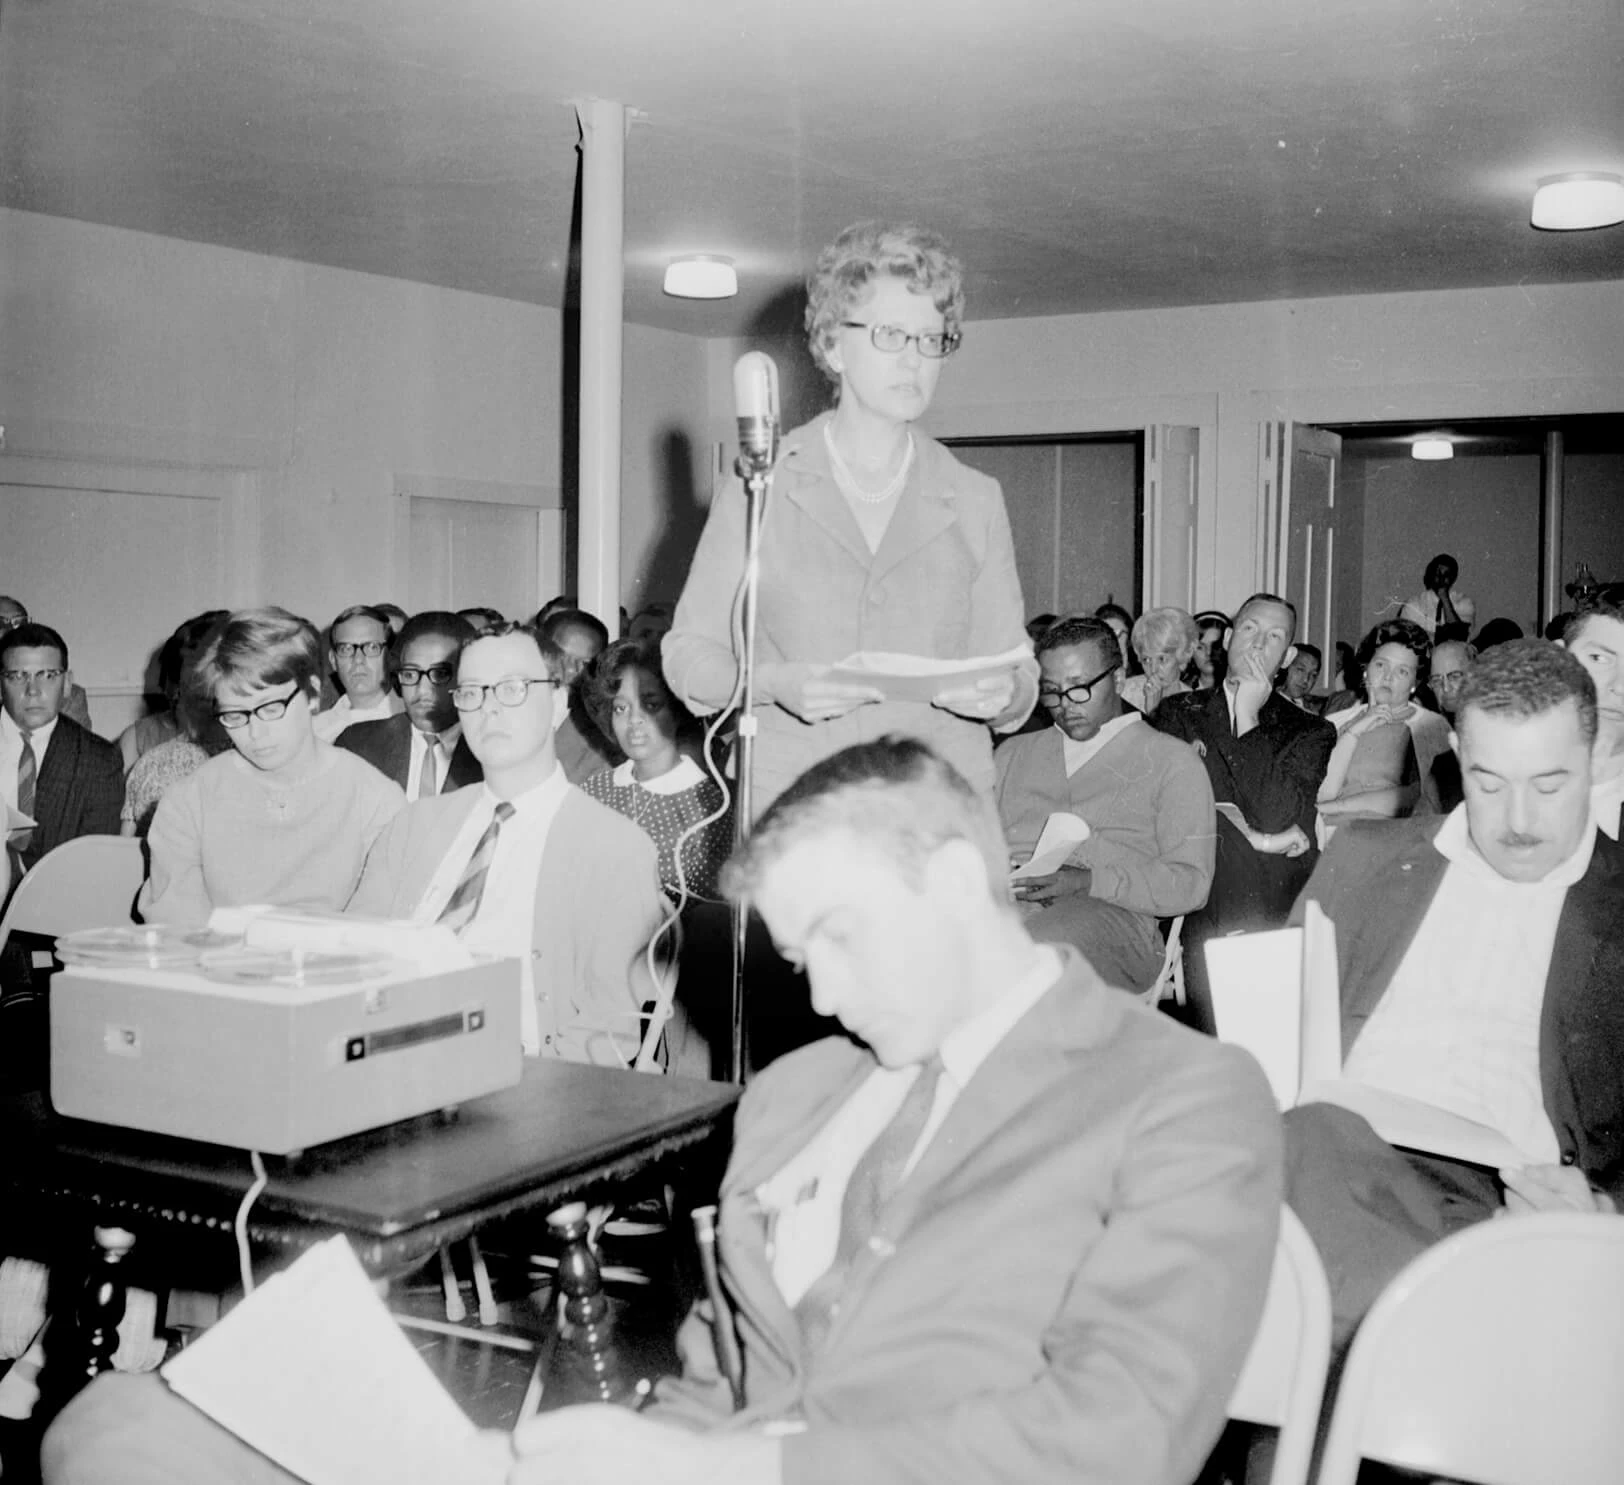 A middle-aged white woman with short curled hair is holding a stack of paper near a microphone at a town meeting. Dozens of people are seated around her.